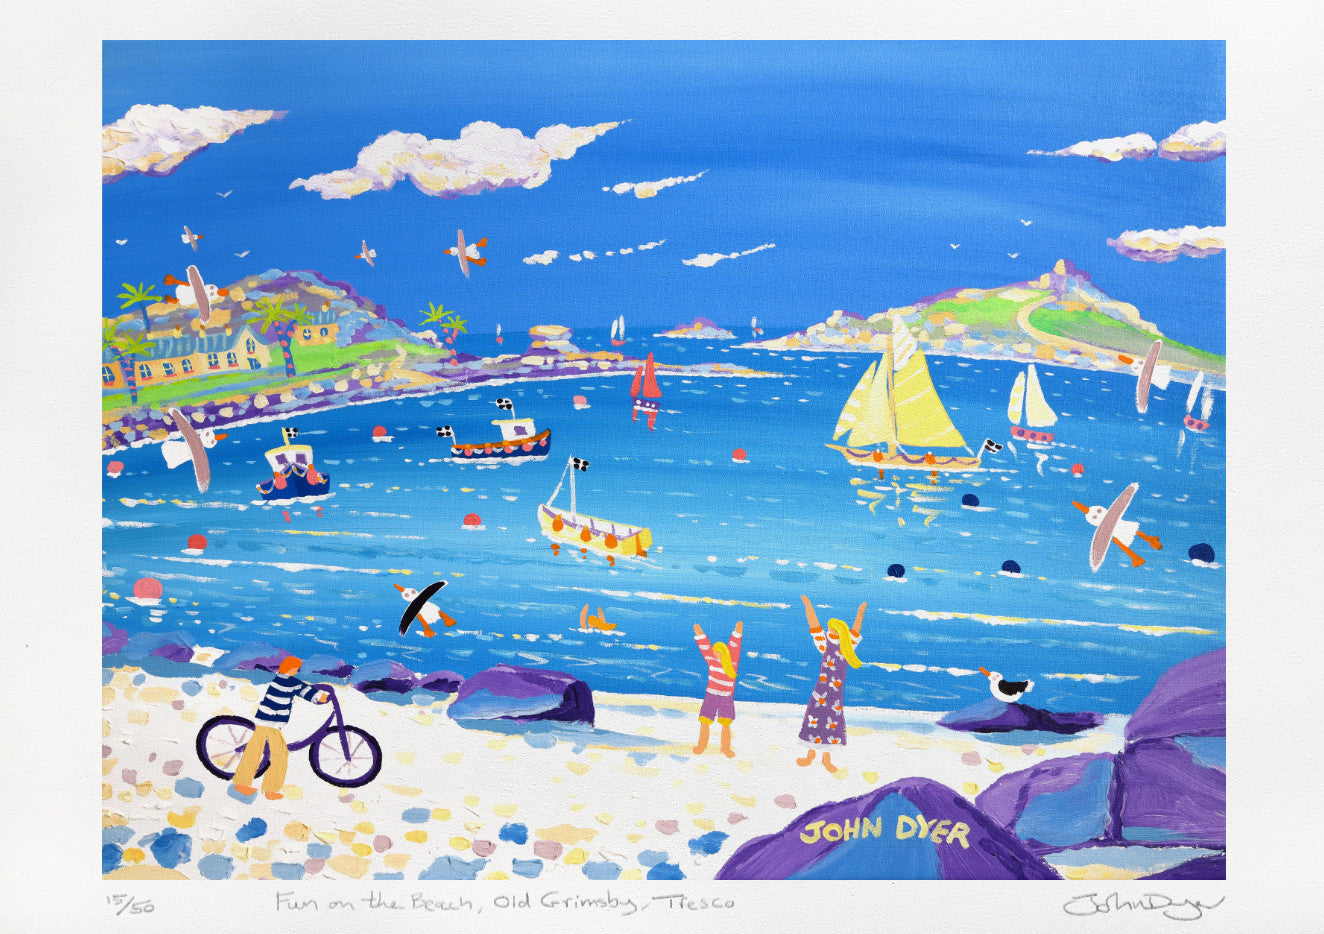 Signed Limited Edition Print by Cornish Artist John Dyer. 'Fun on the Beach, Old Grimsby, Tresco'. Tresco Gallery print